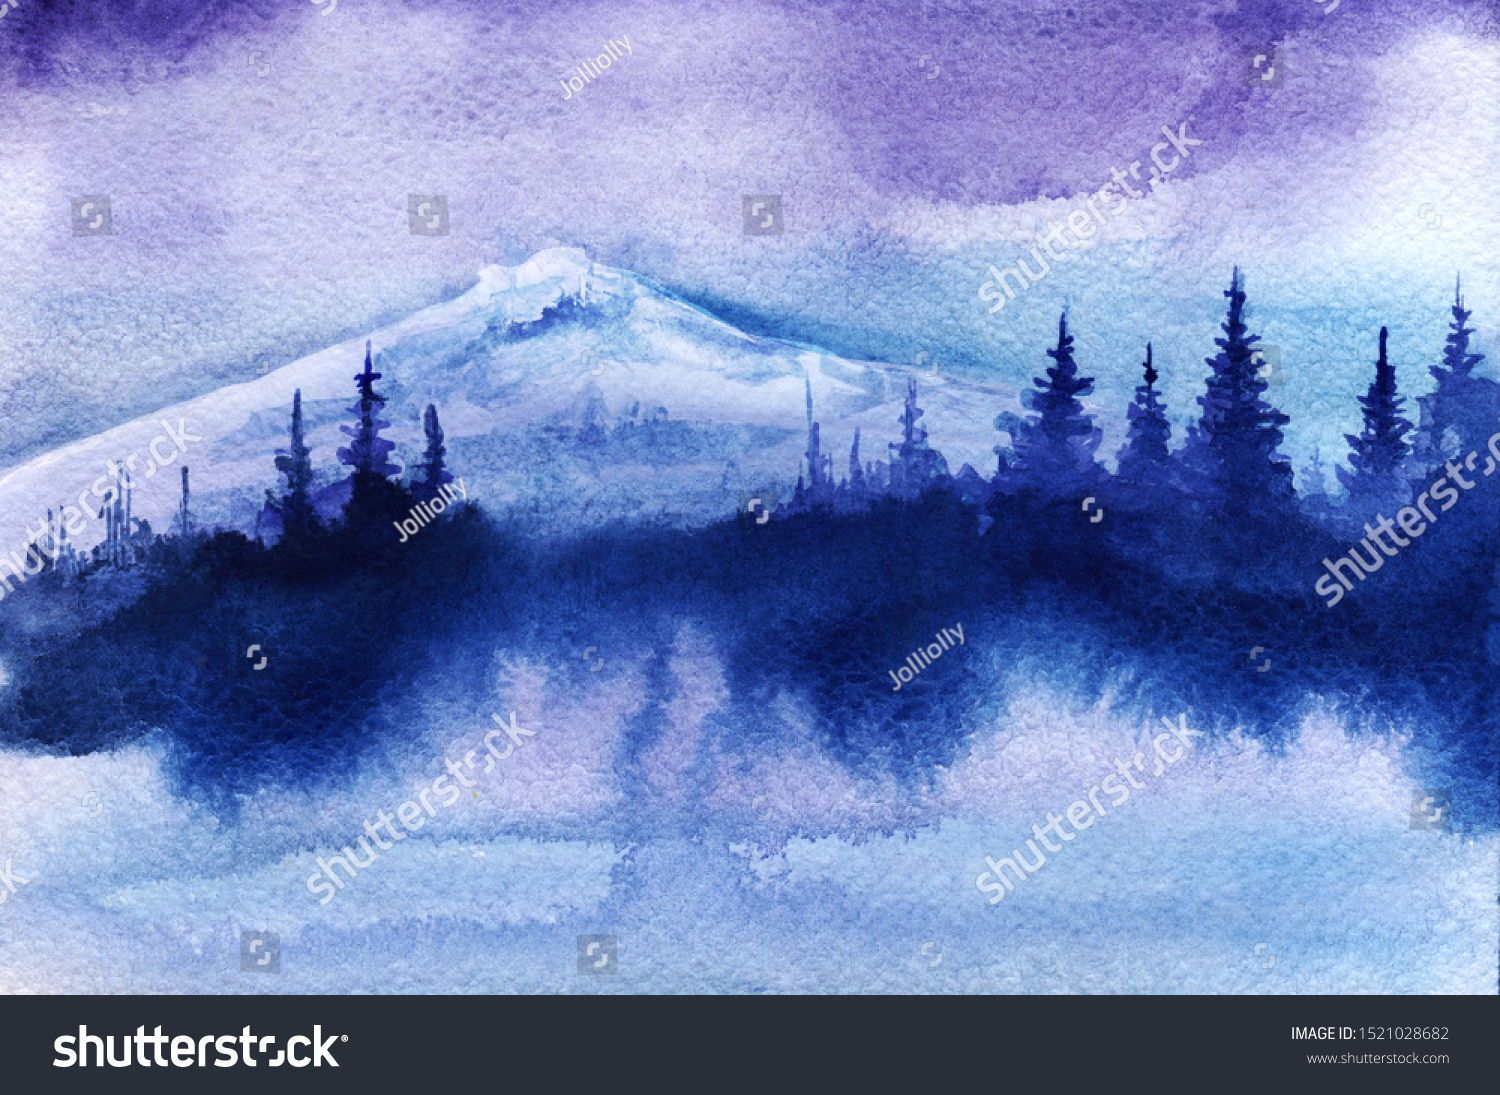 Abstract Watercolor Landscape Silhouette White Snowy Stock Photo Edit Now 1521028682